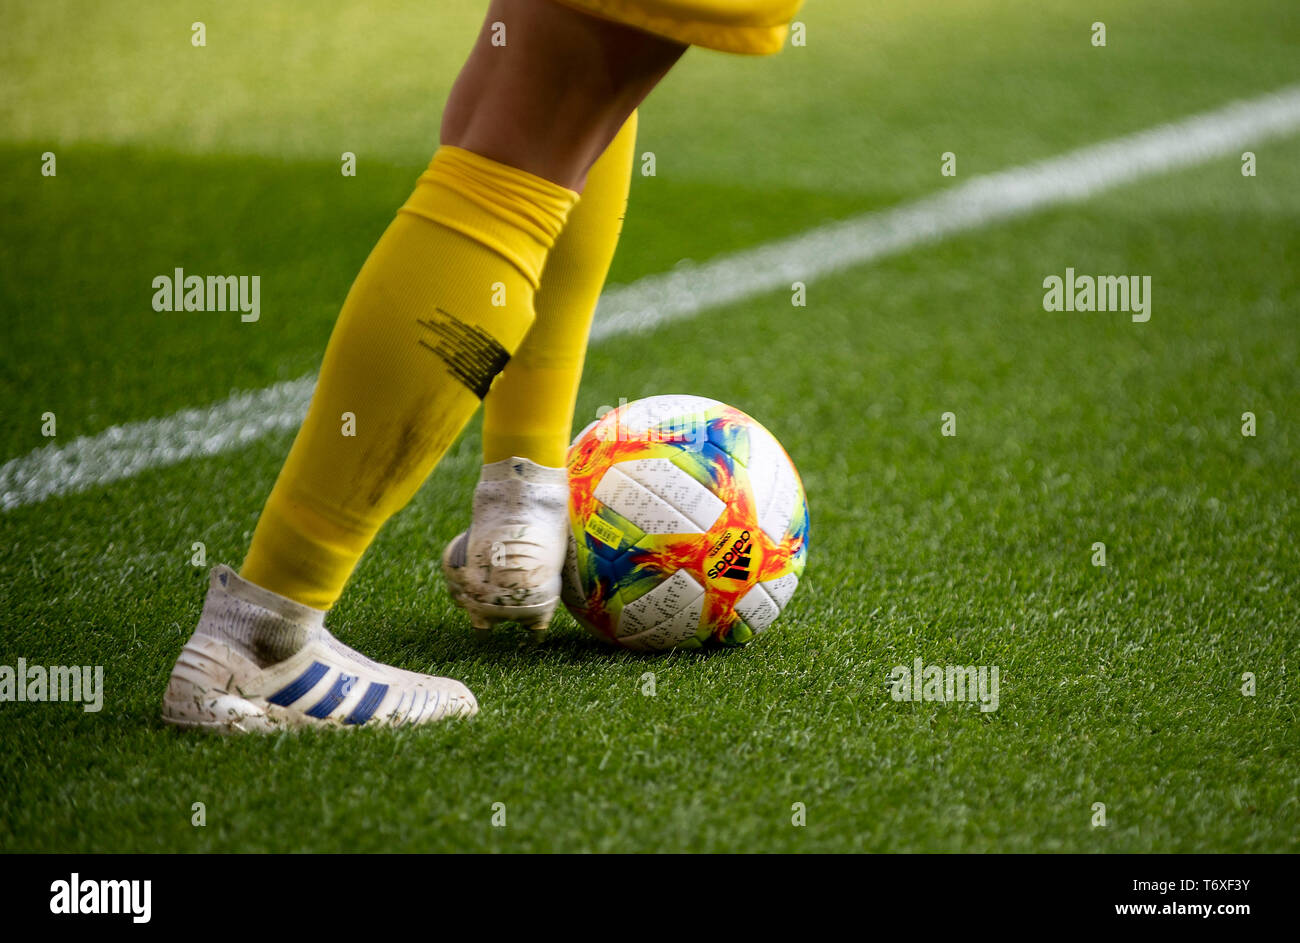 Adidas football boots High Resolution Stock Photography and Images - Alamy